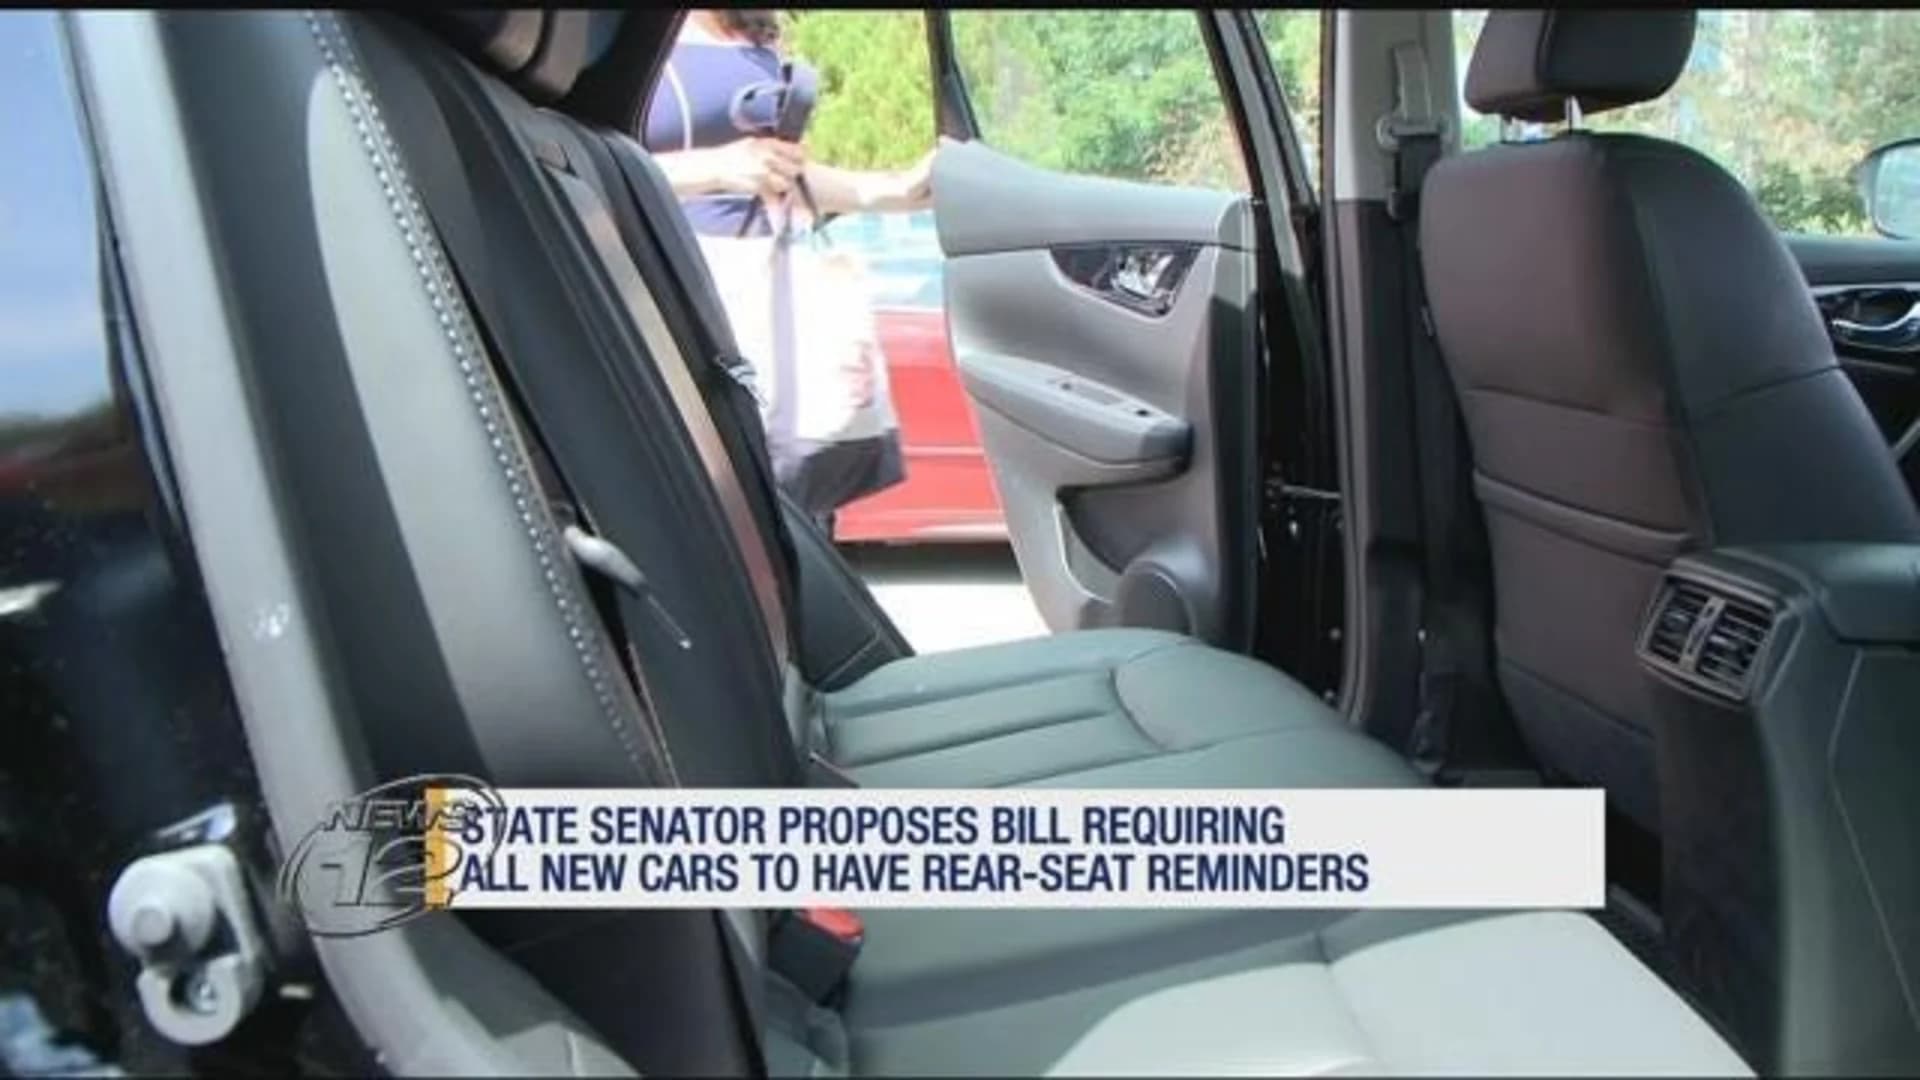 Proposal would require vehicles to have rear-seat detection systems